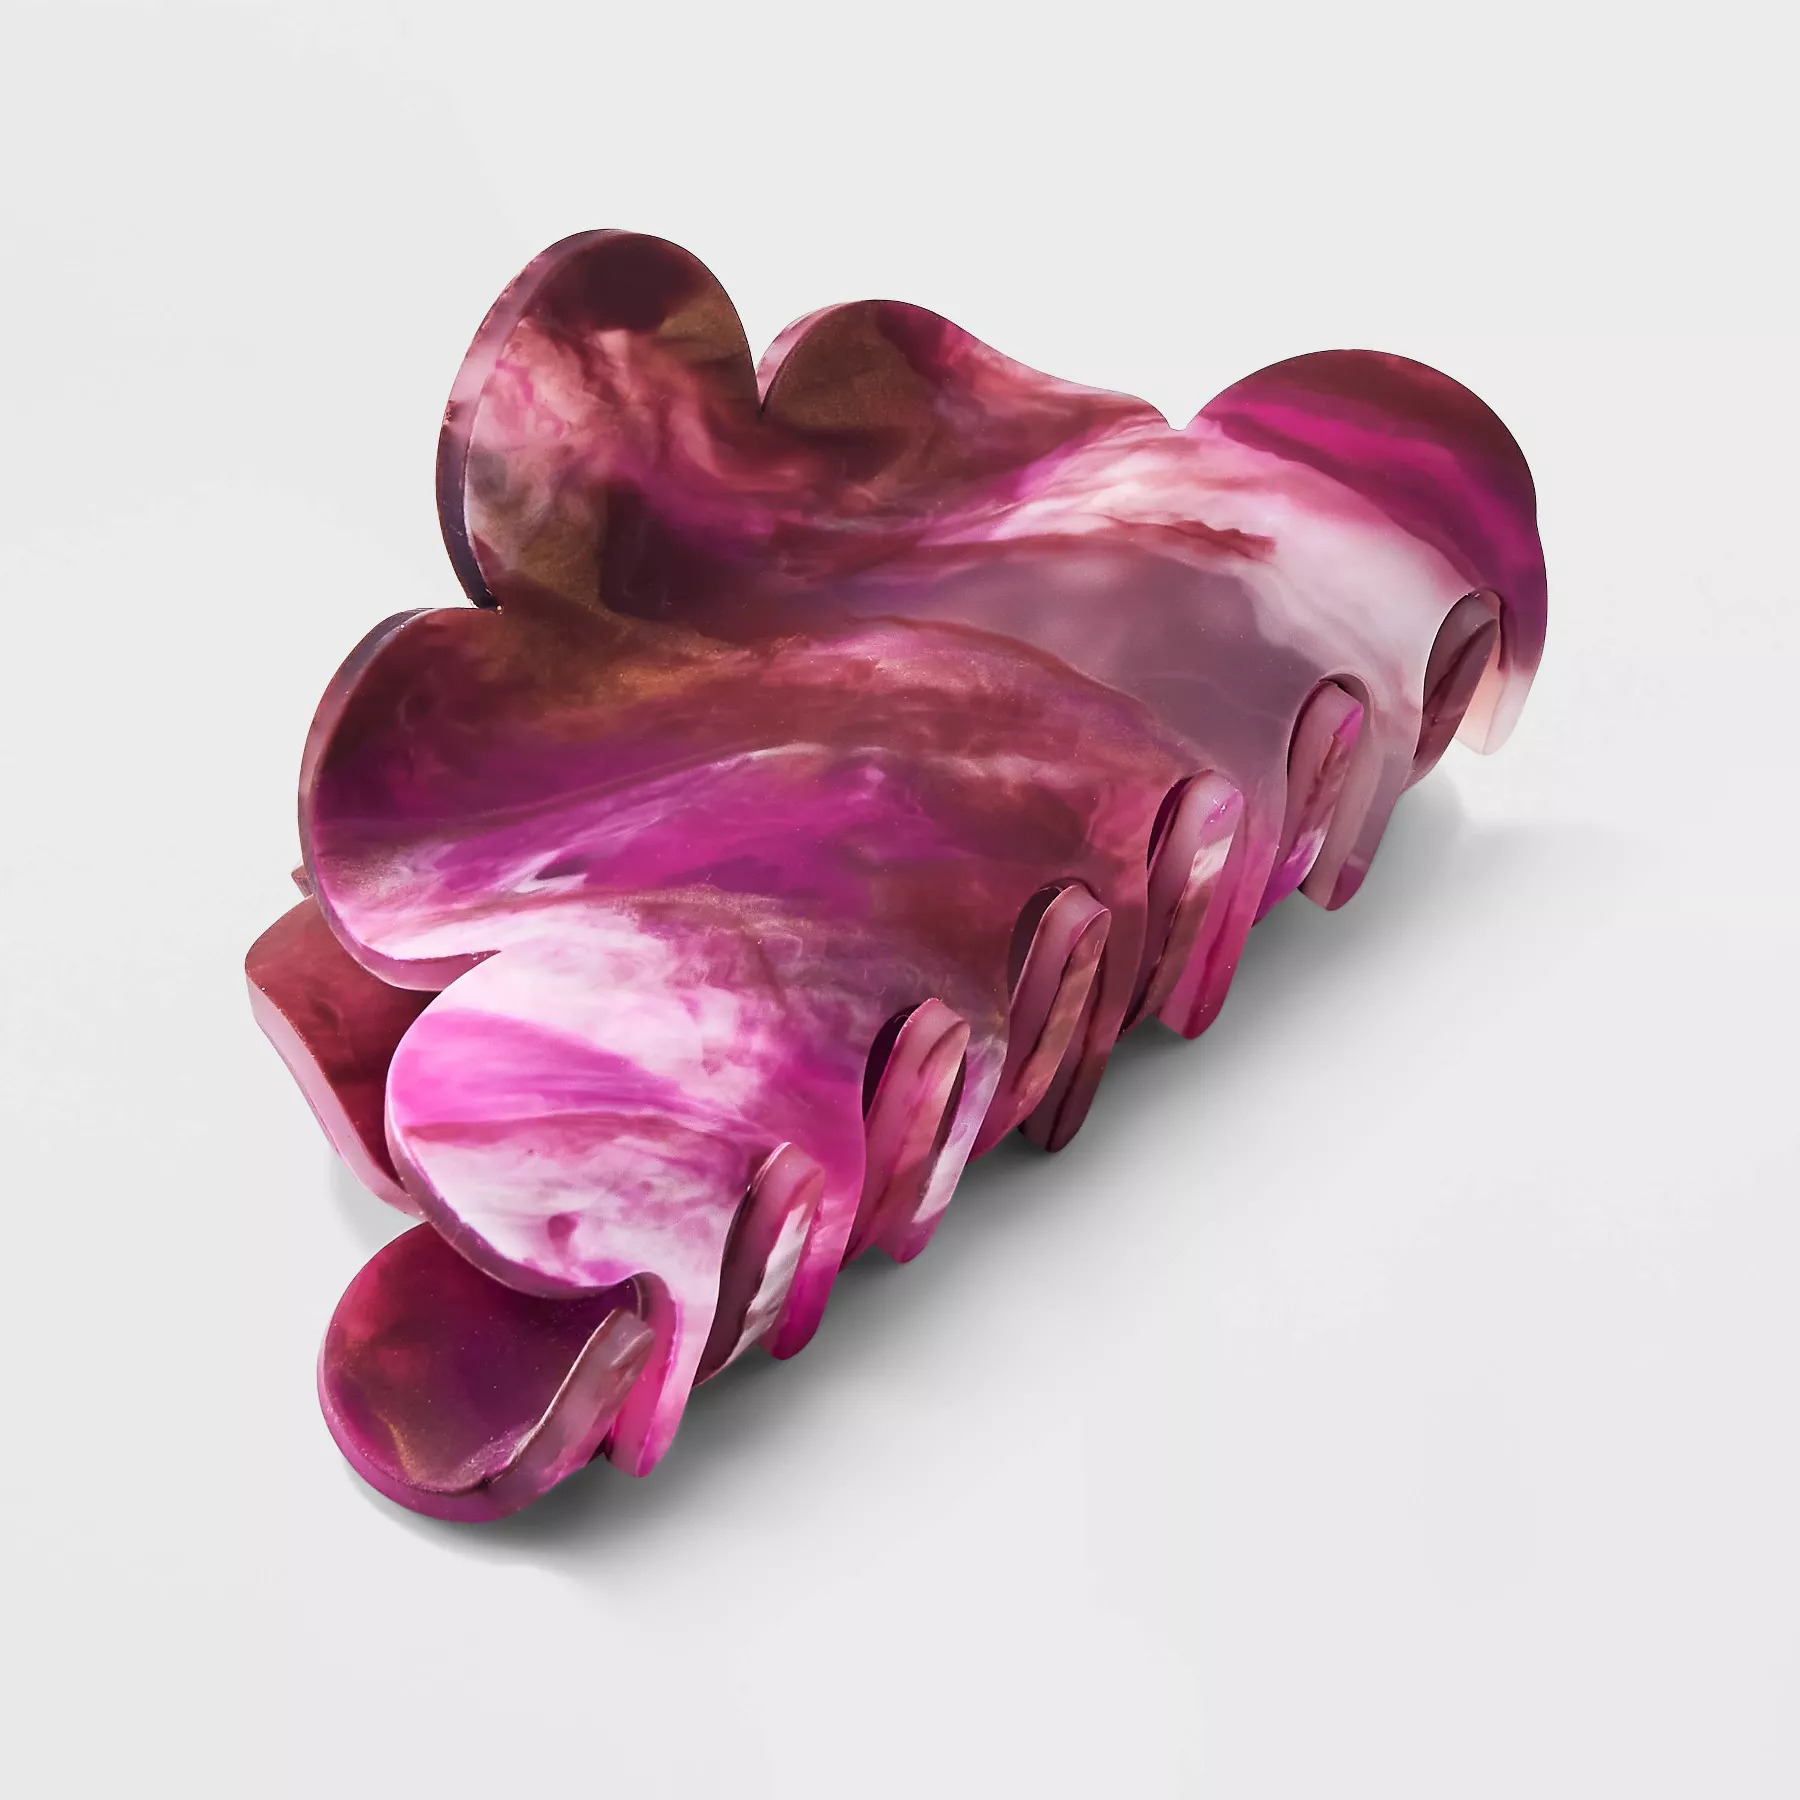 The Hair Clip in a dark pink marble color